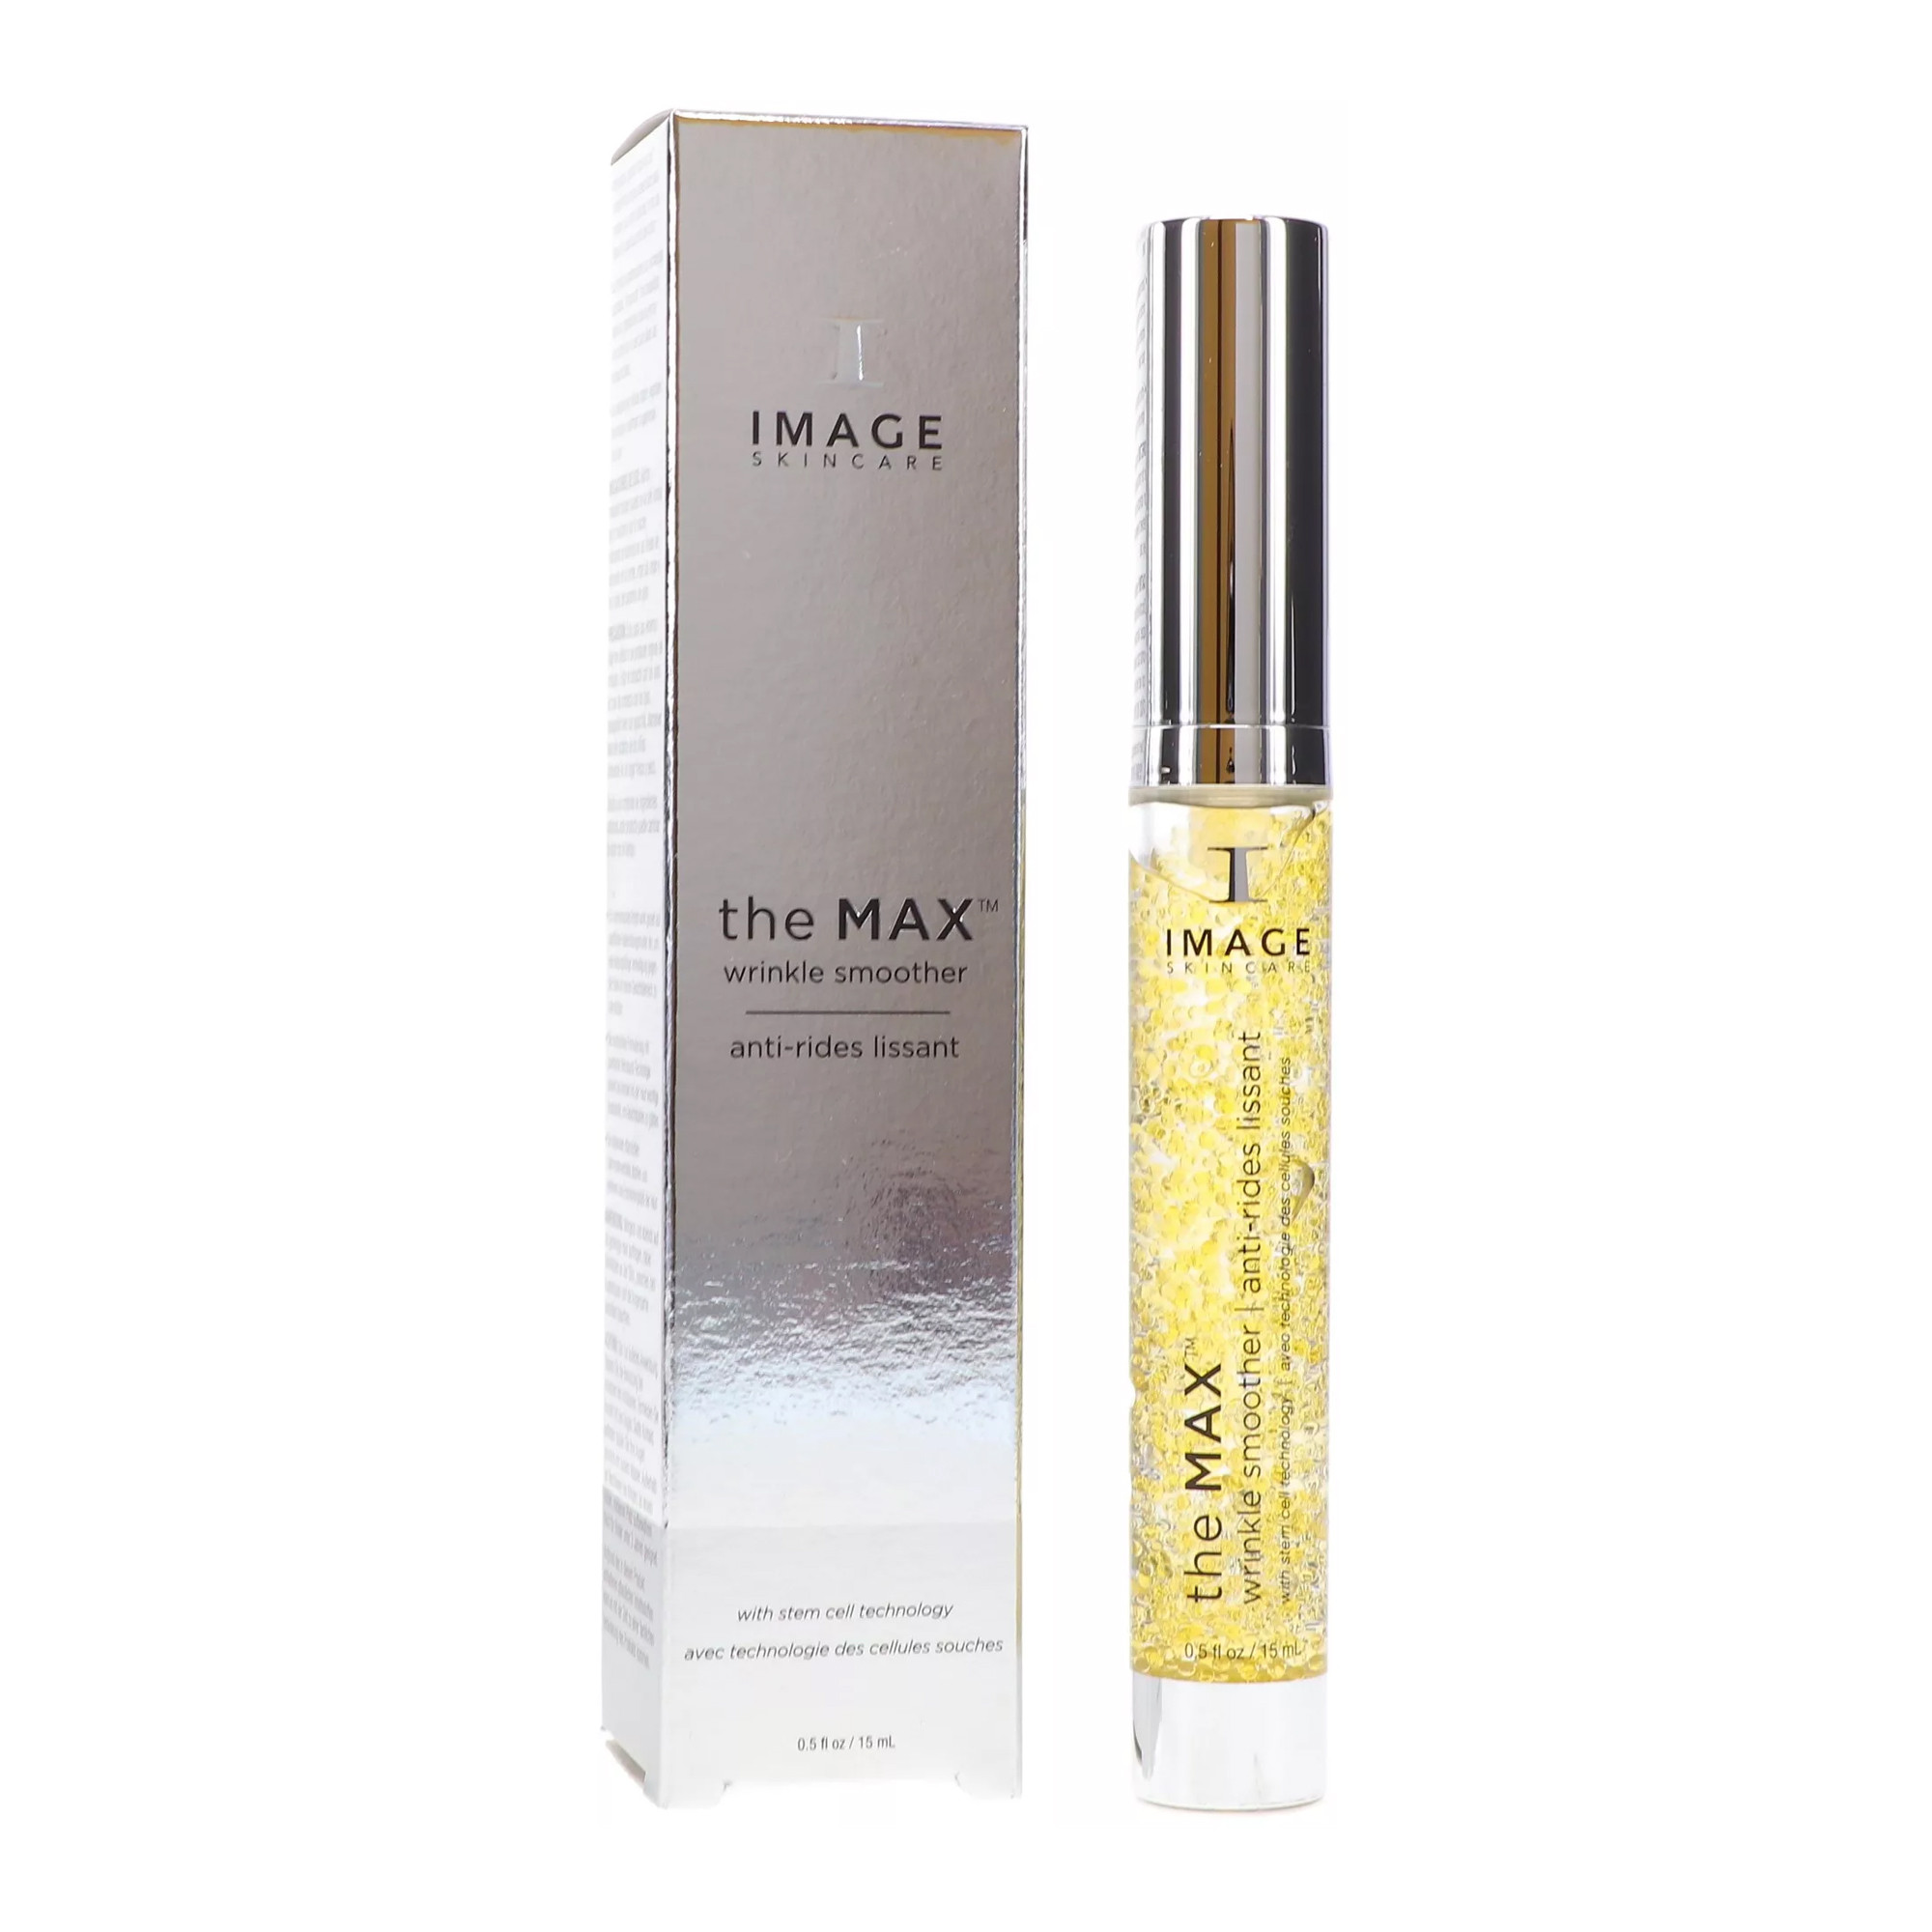 image skincare the max wrinkle smoother цена